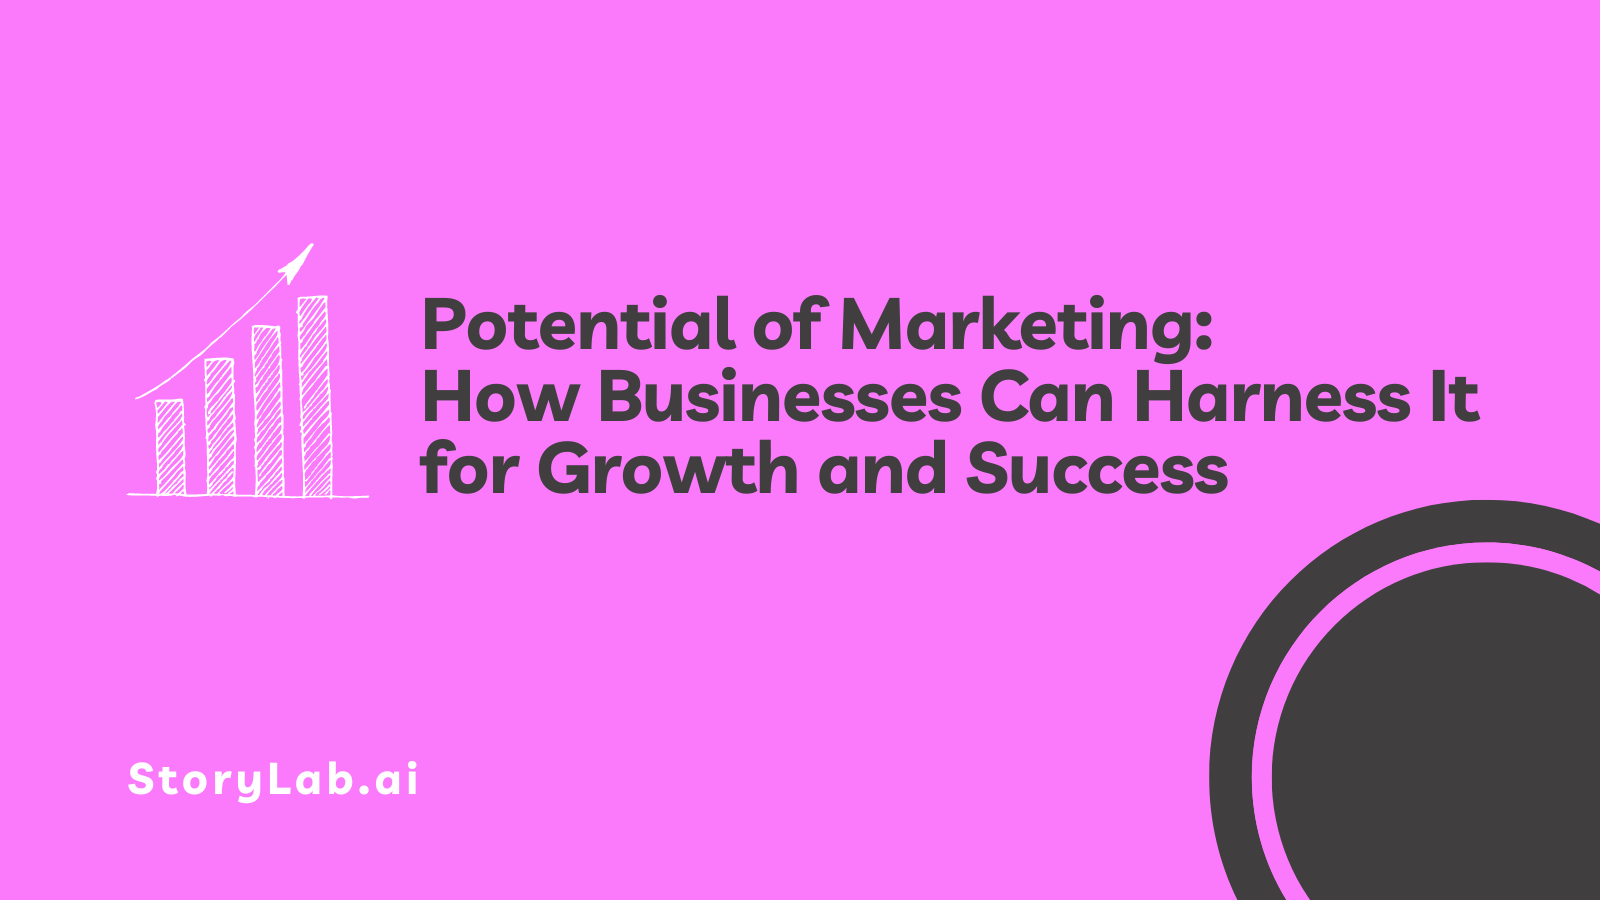 Potential of Marketing How Businesses Can Harness It for Growth and Success